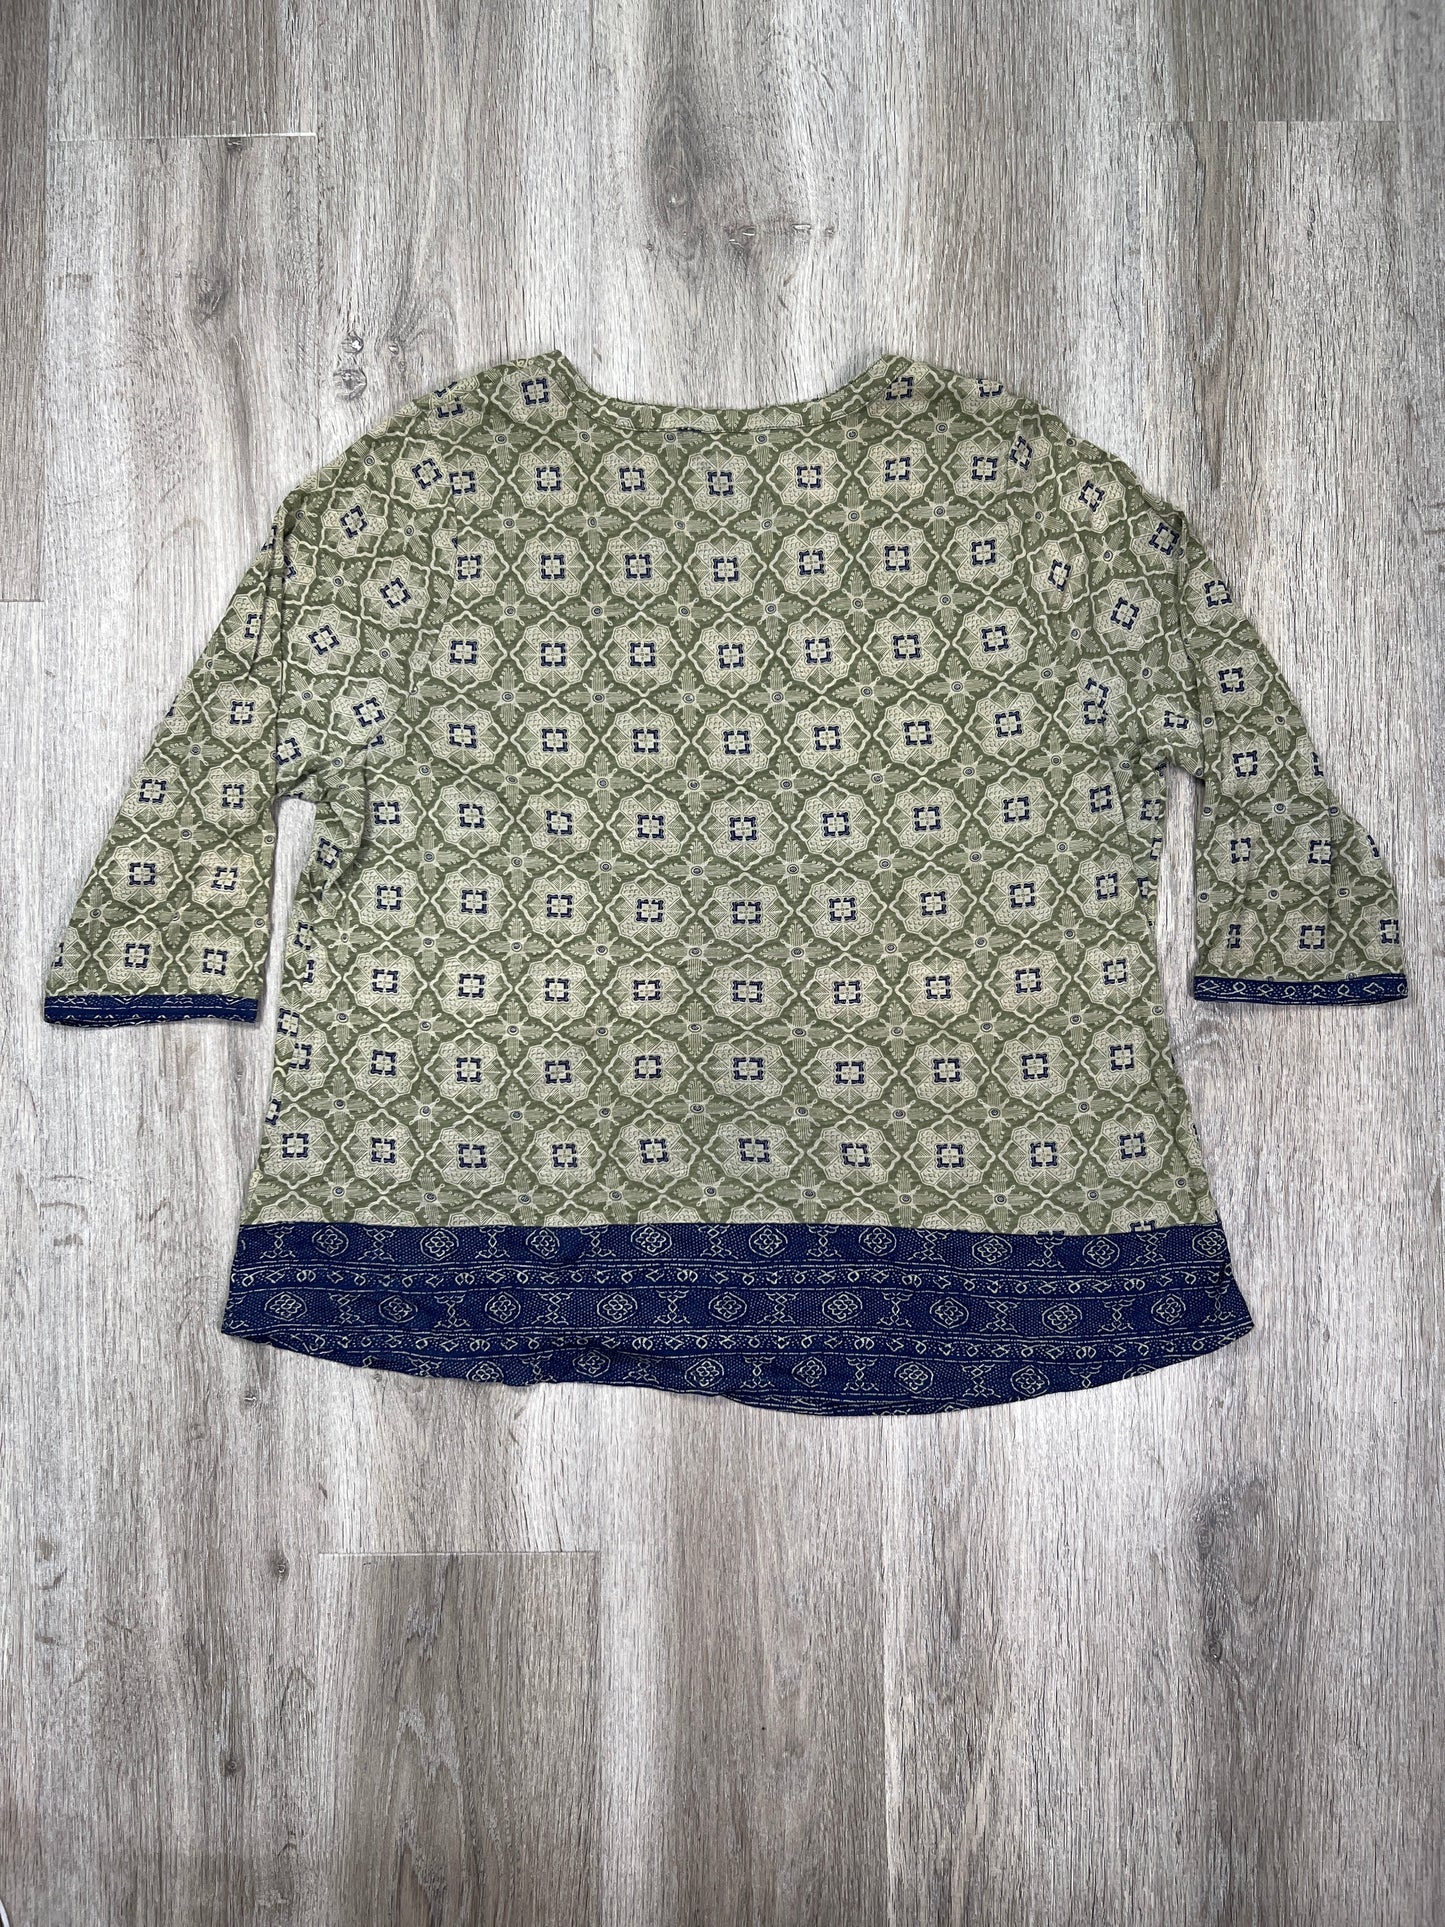 Green Top 3/4 Sleeve Lucky Brand, Size 1x